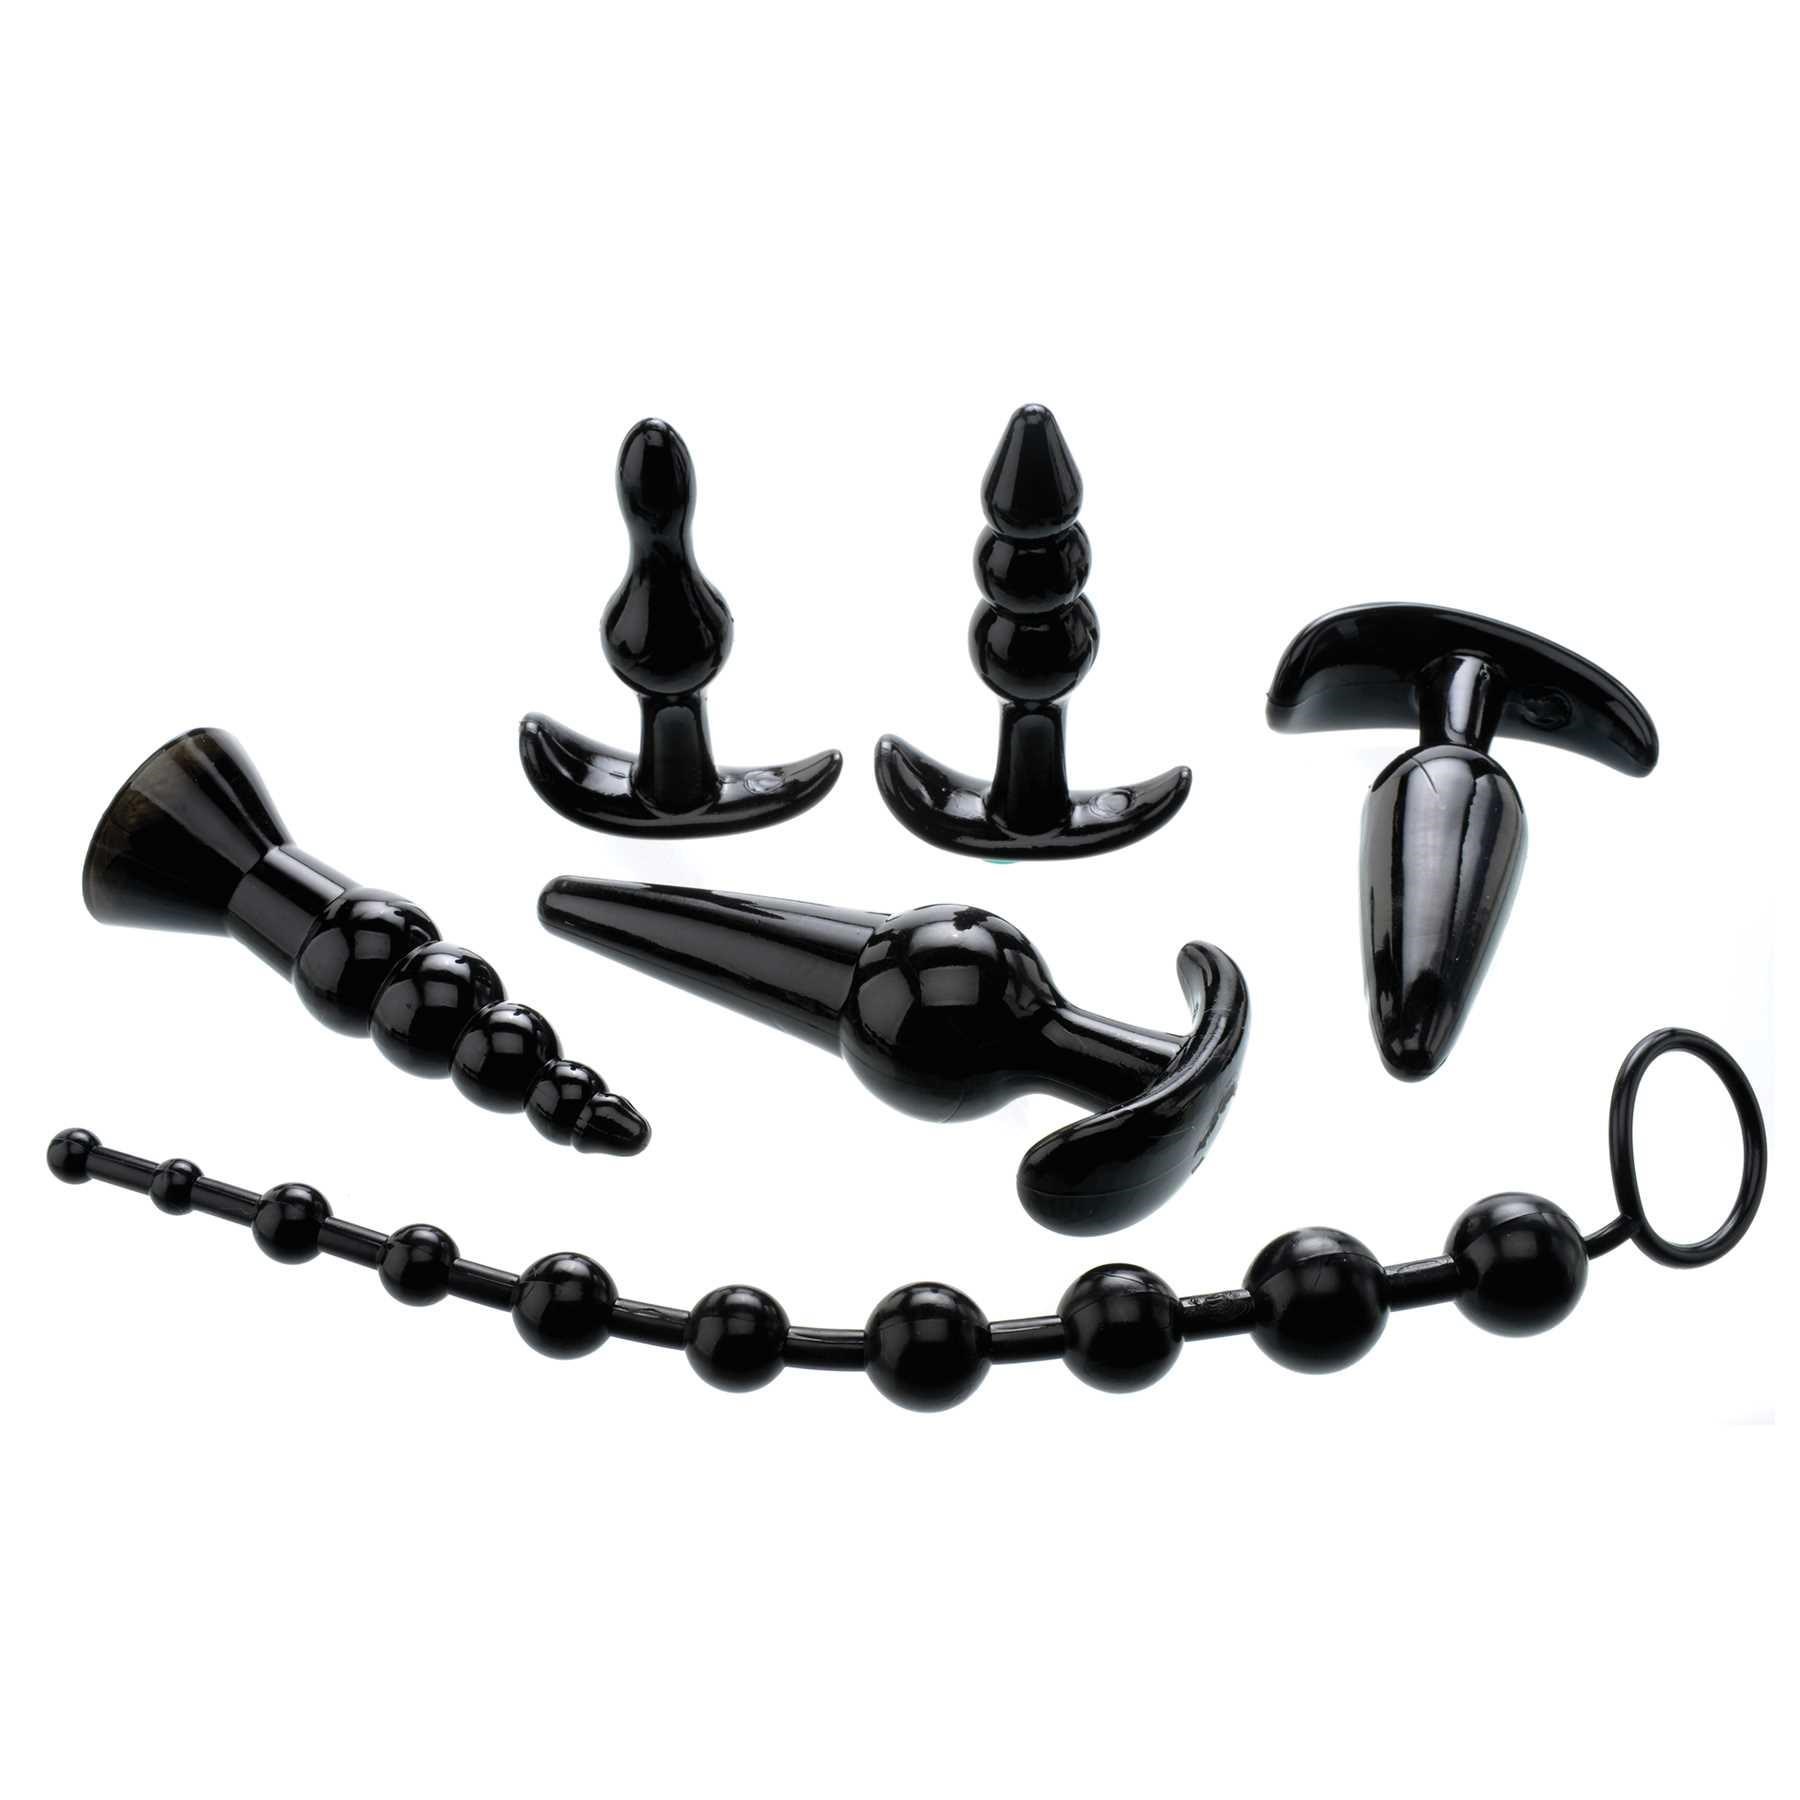 Try-Curious Anal Plug Kit table-top image 2